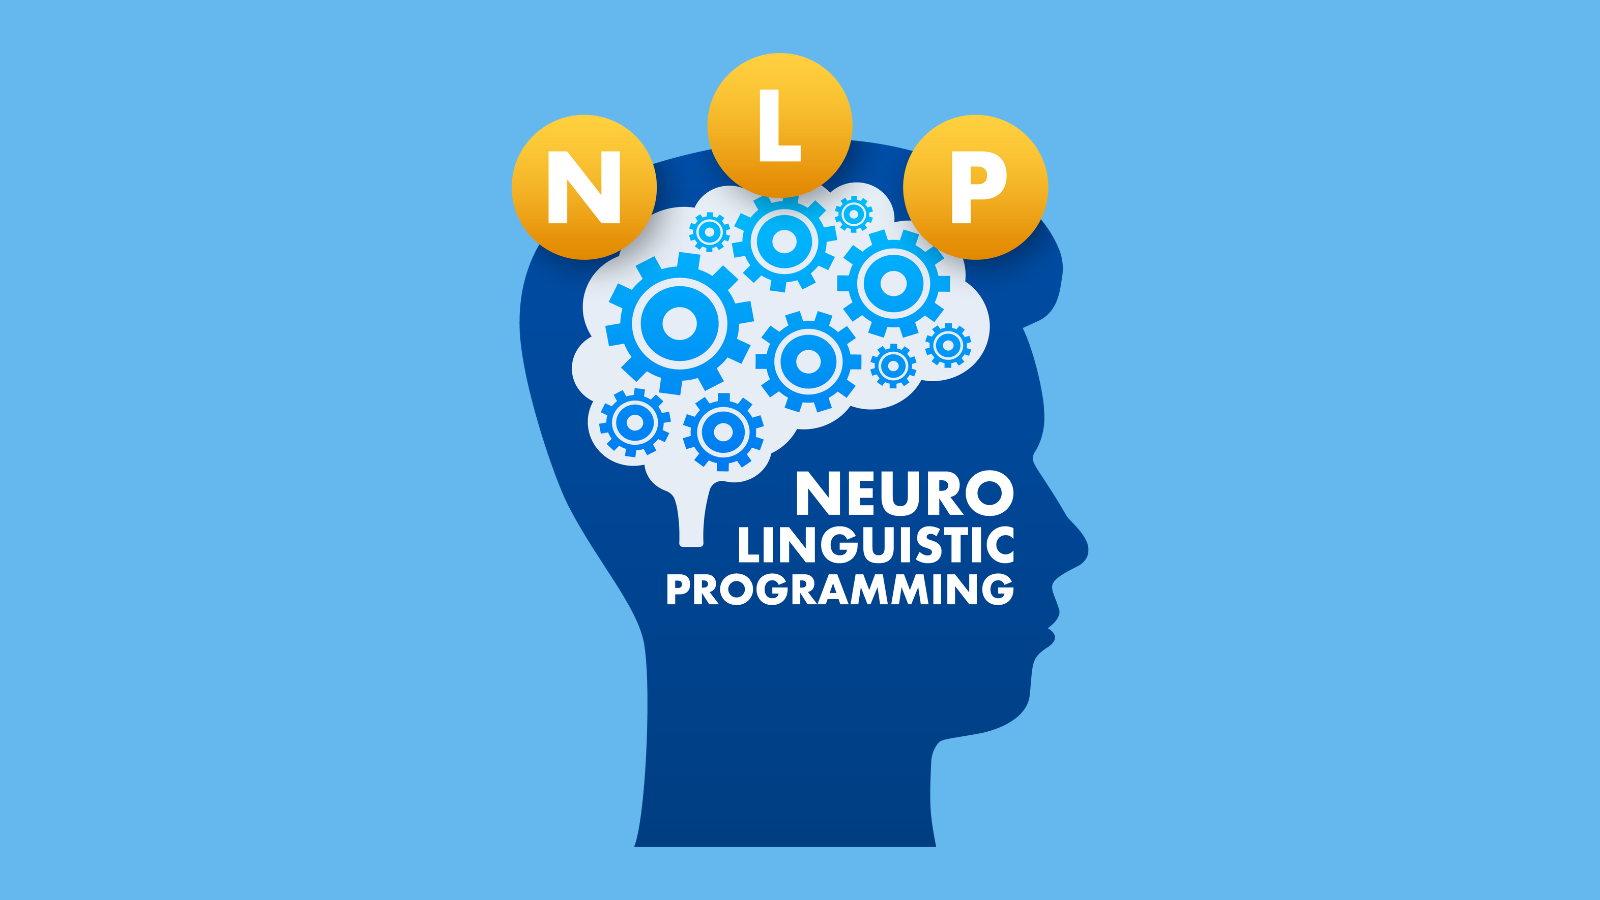 NLP and its use in the classroom